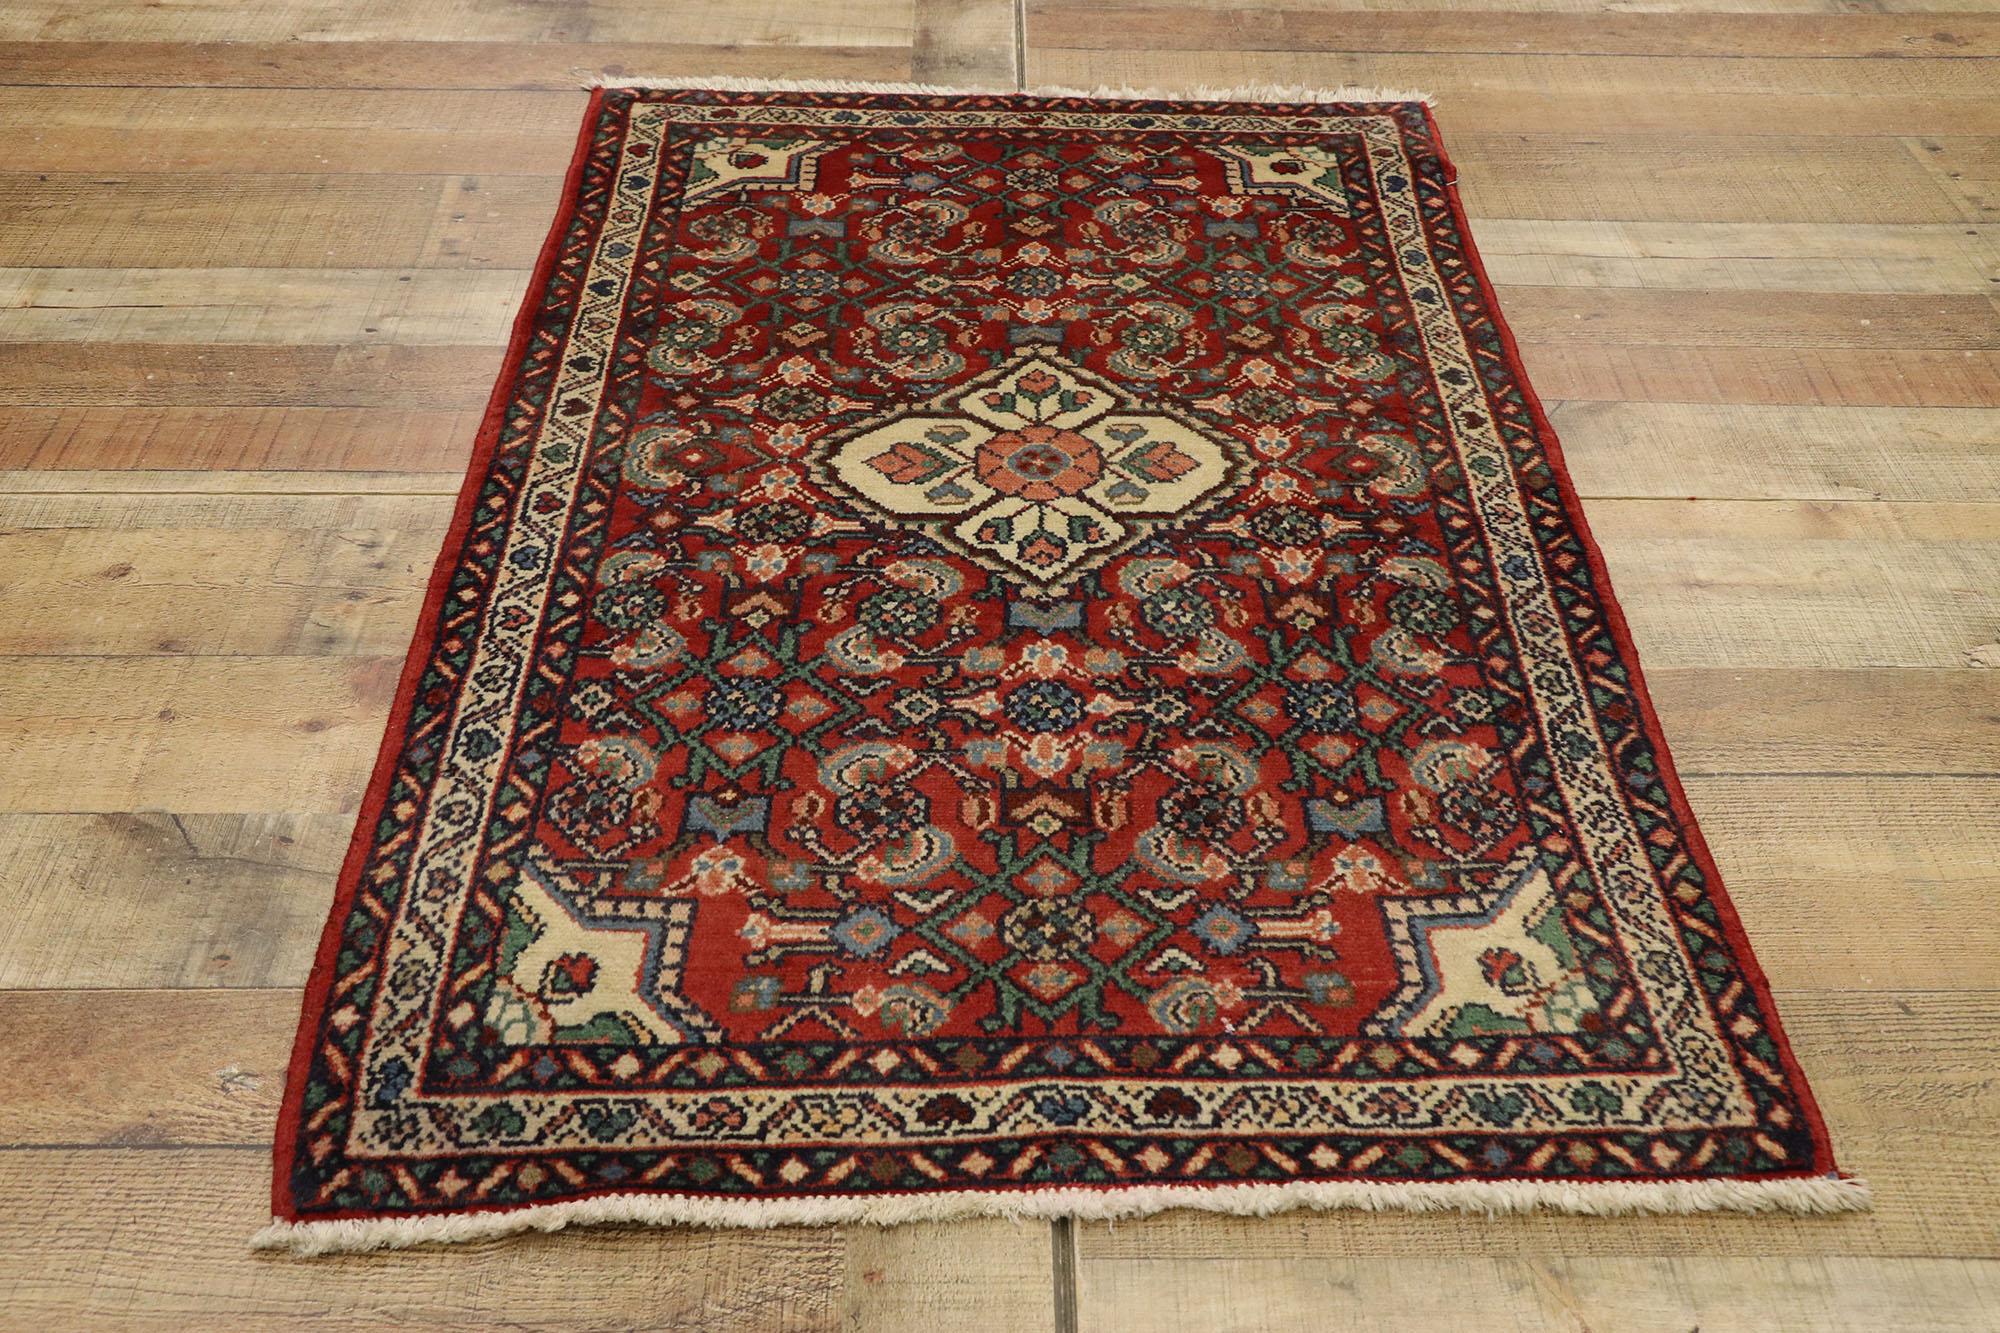 Vintage Persian Dergazine Hamadan Rug with Herati Pattern, Foyer or Entry Rug In Good Condition For Sale In Dallas, TX